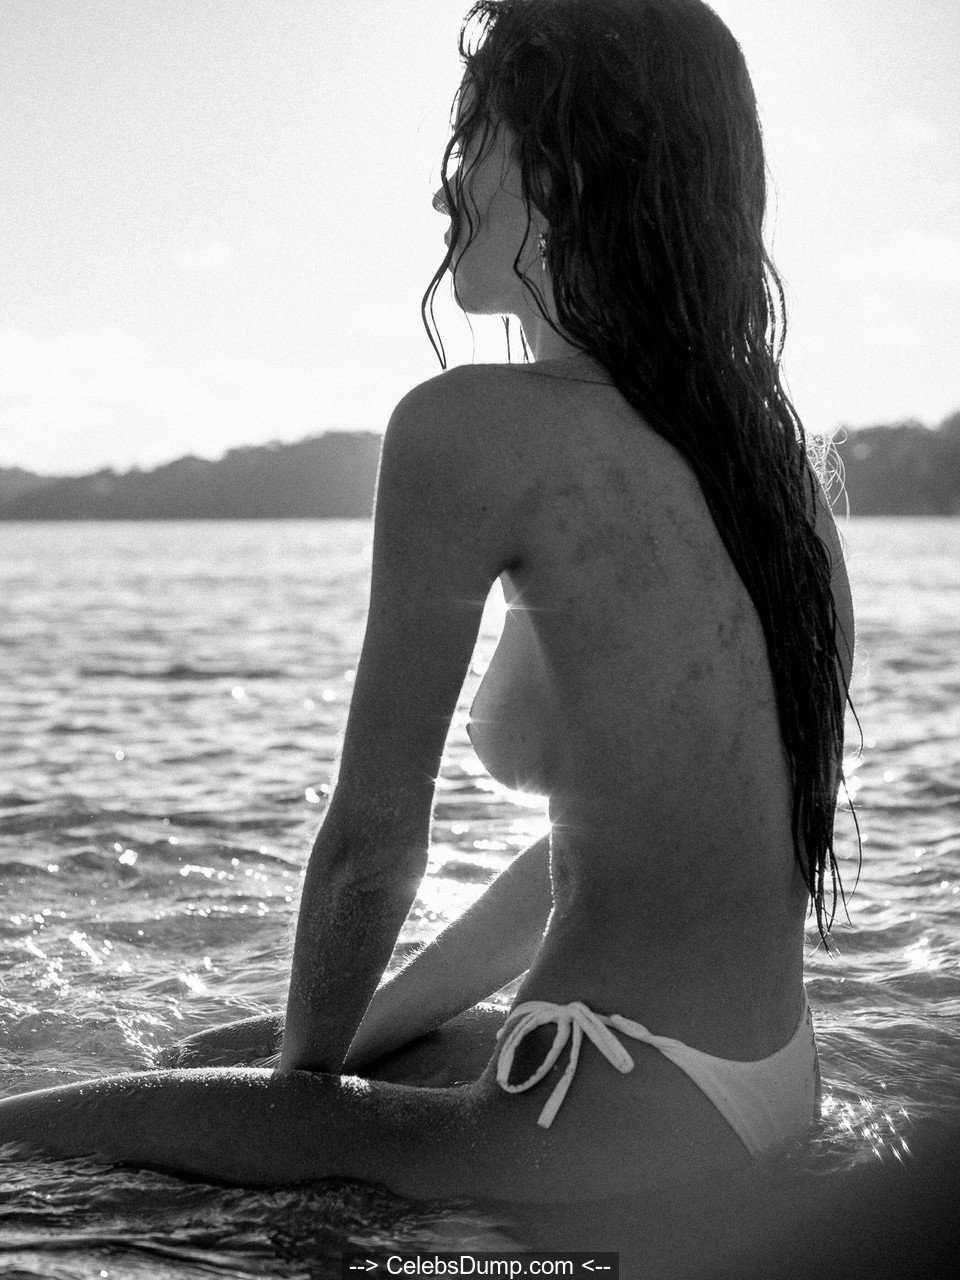 Isabelle Mathers topless on a beach by Tim Swallow.